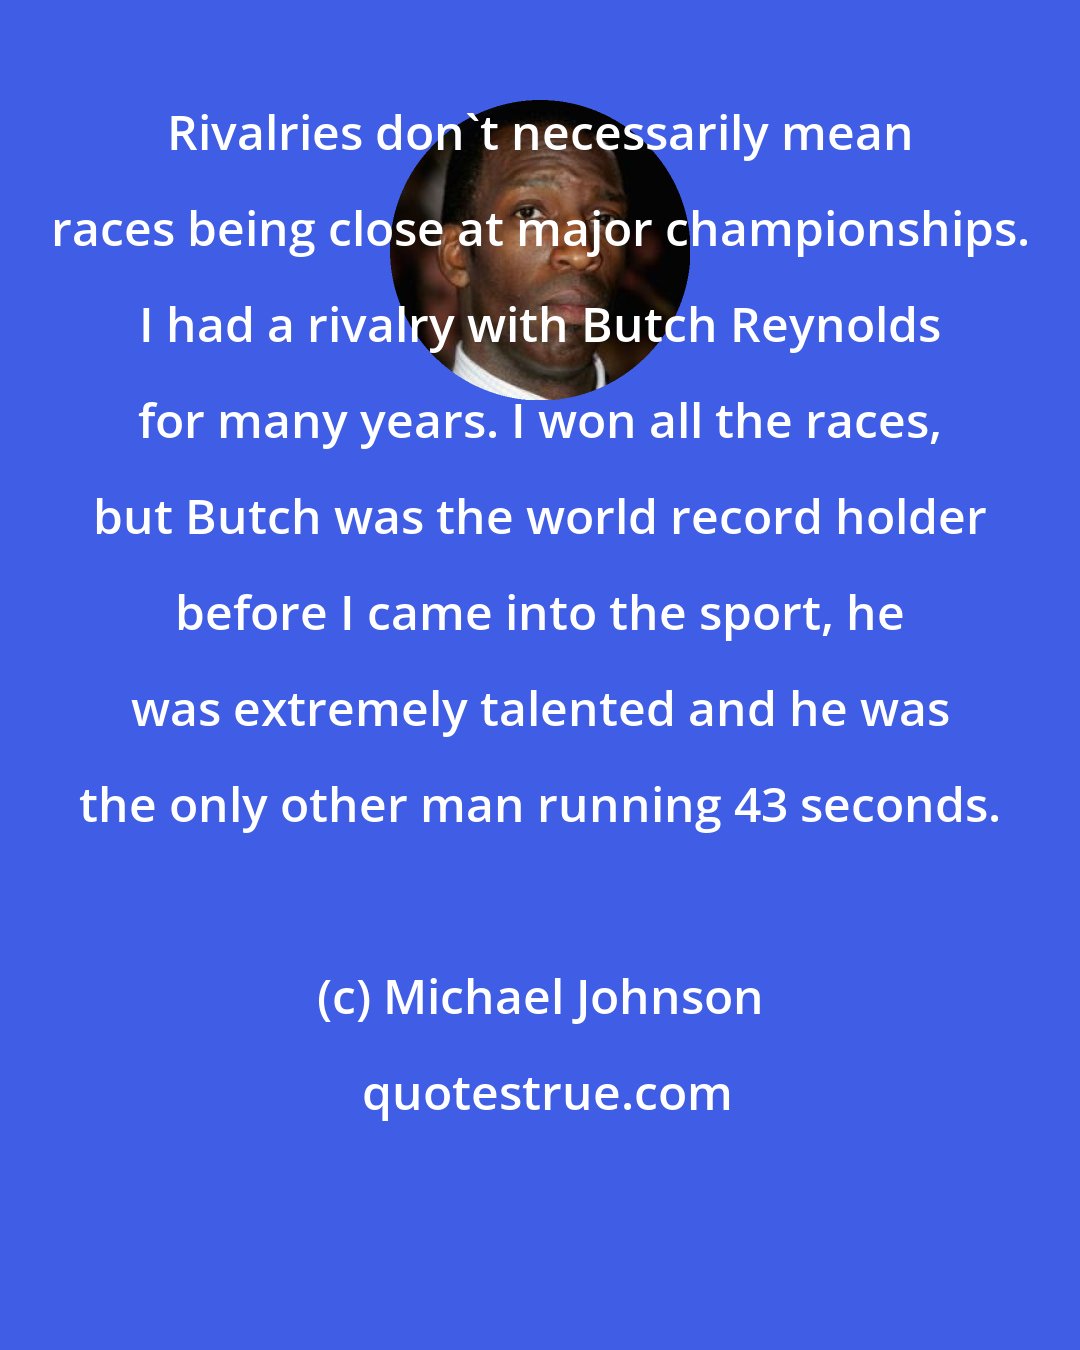 Michael Johnson: Rivalries don't necessarily mean races being close at major championships. I had a rivalry with Butch Reynolds for many years. I won all the races, but Butch was the world record holder before I came into the sport, he was extremely talented and he was the only other man running 43 seconds.